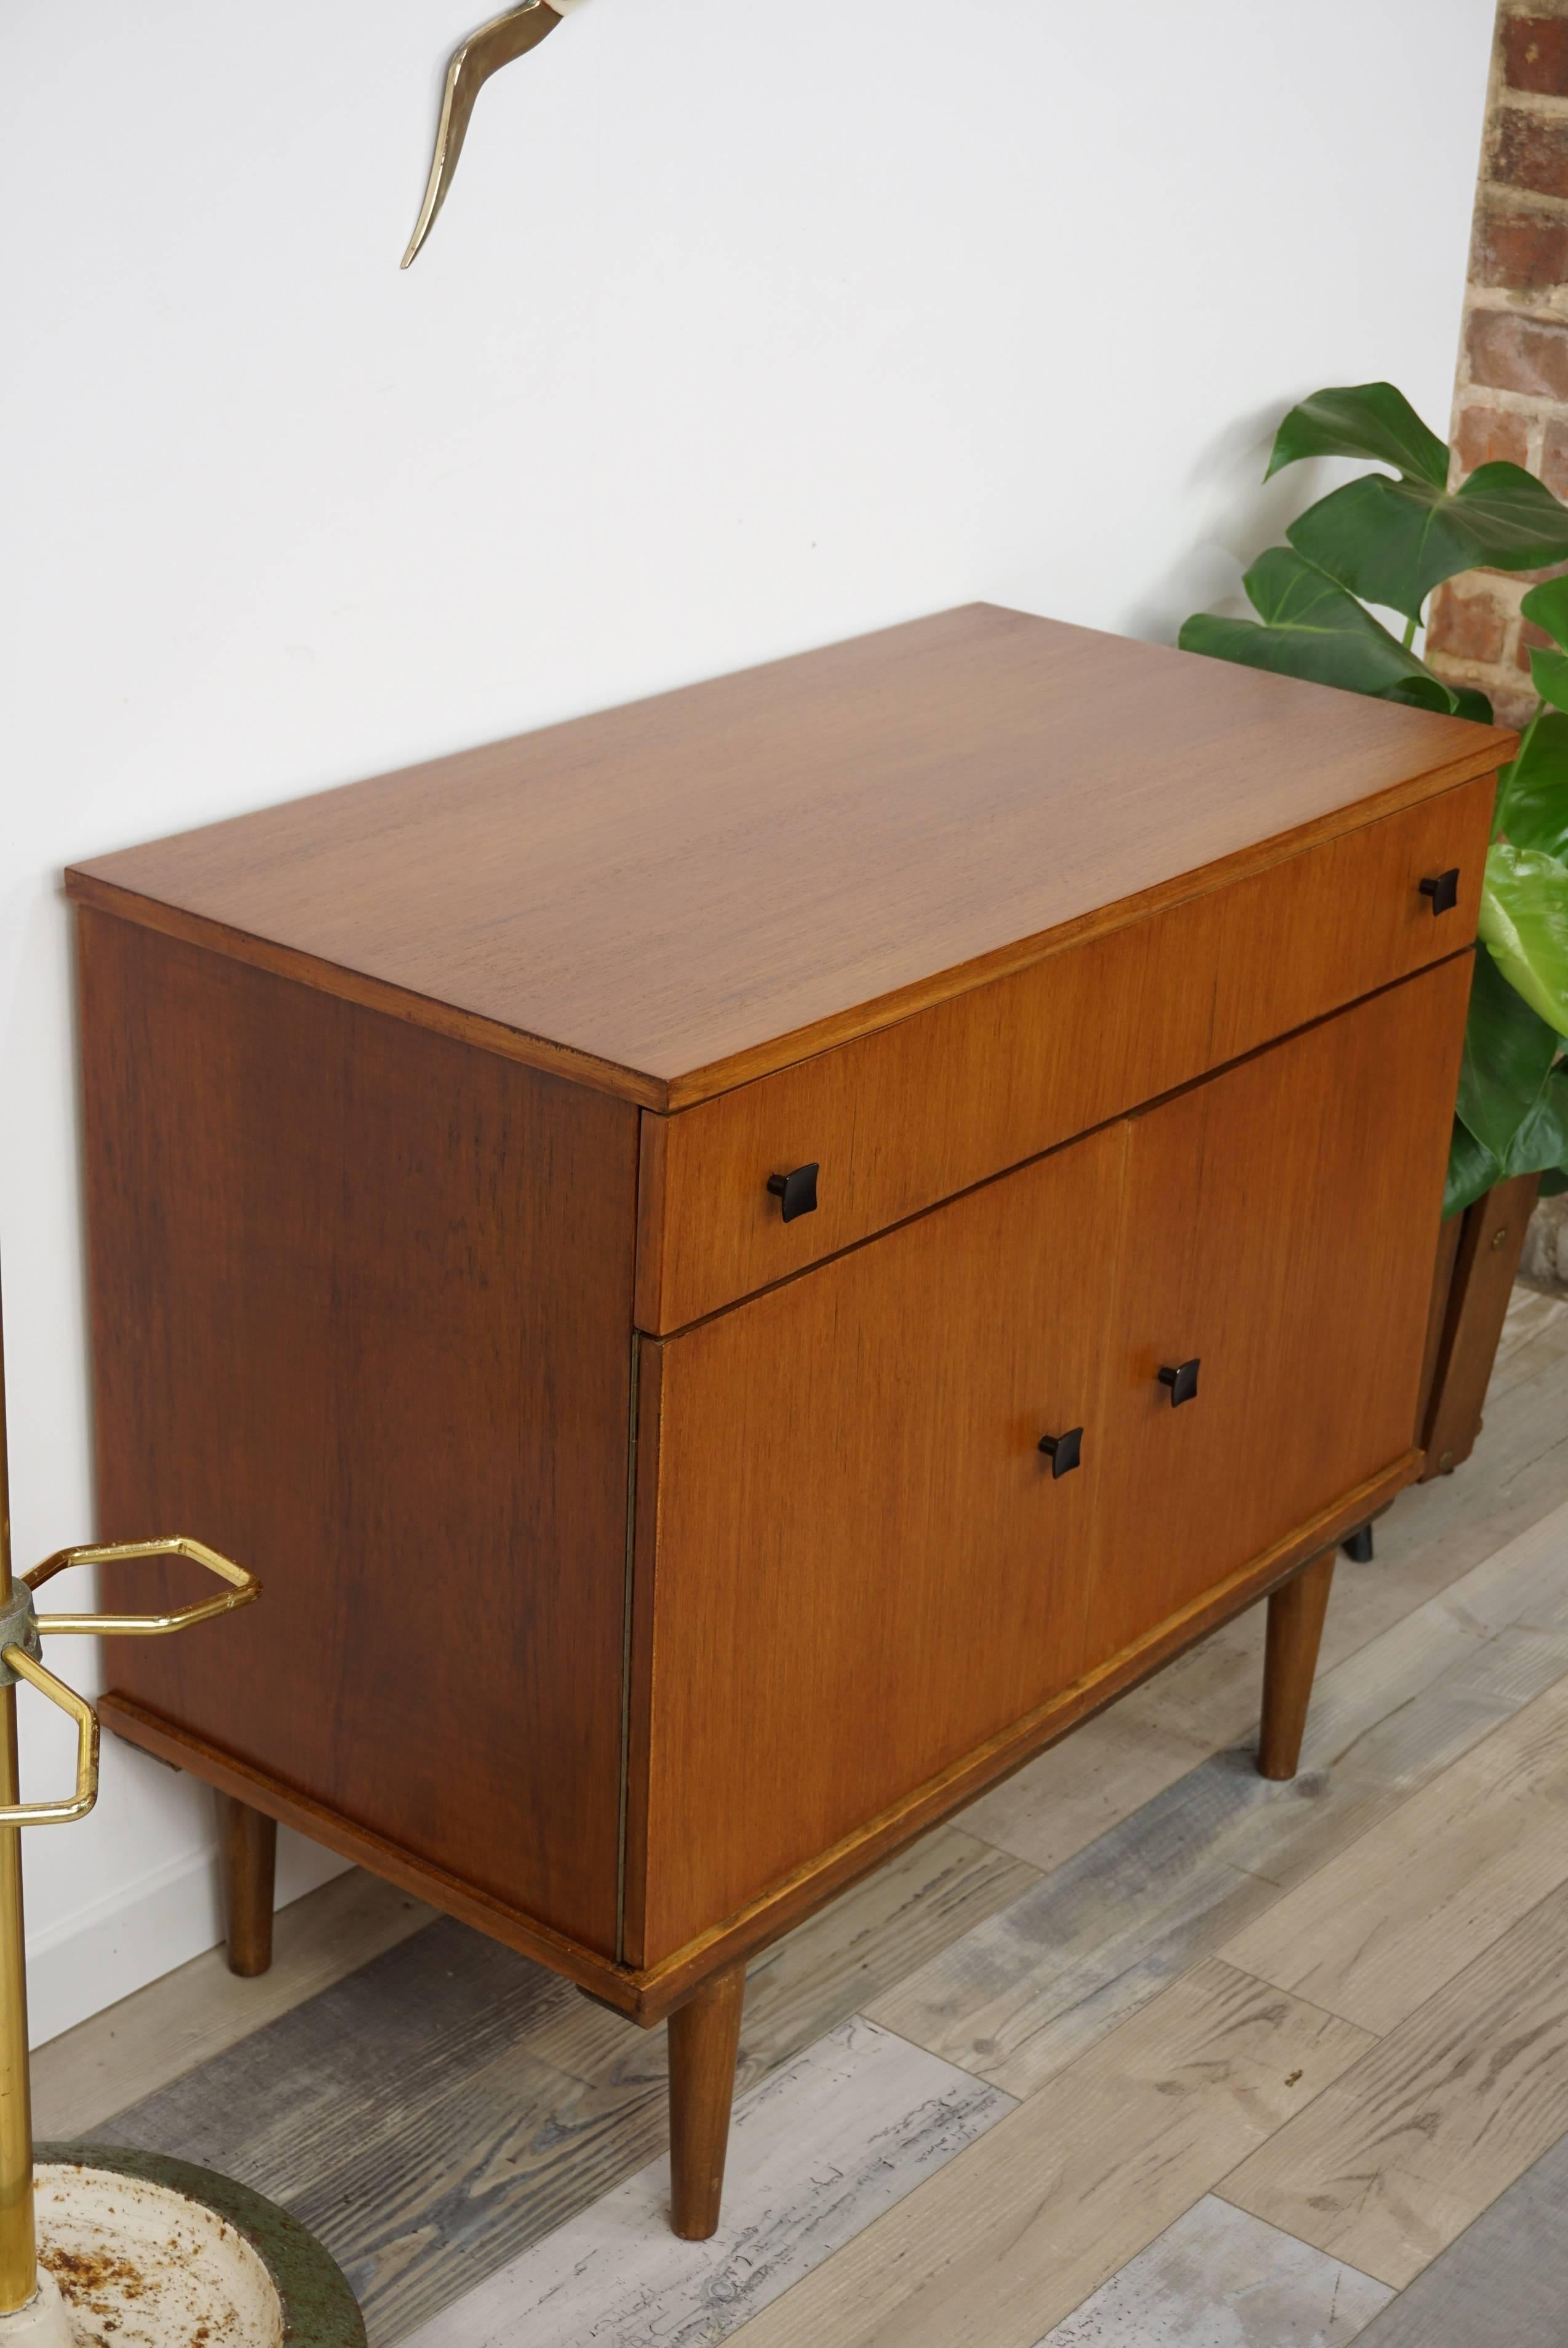 Metal Wooden Teak Storage Unit from the 1950s-1960s